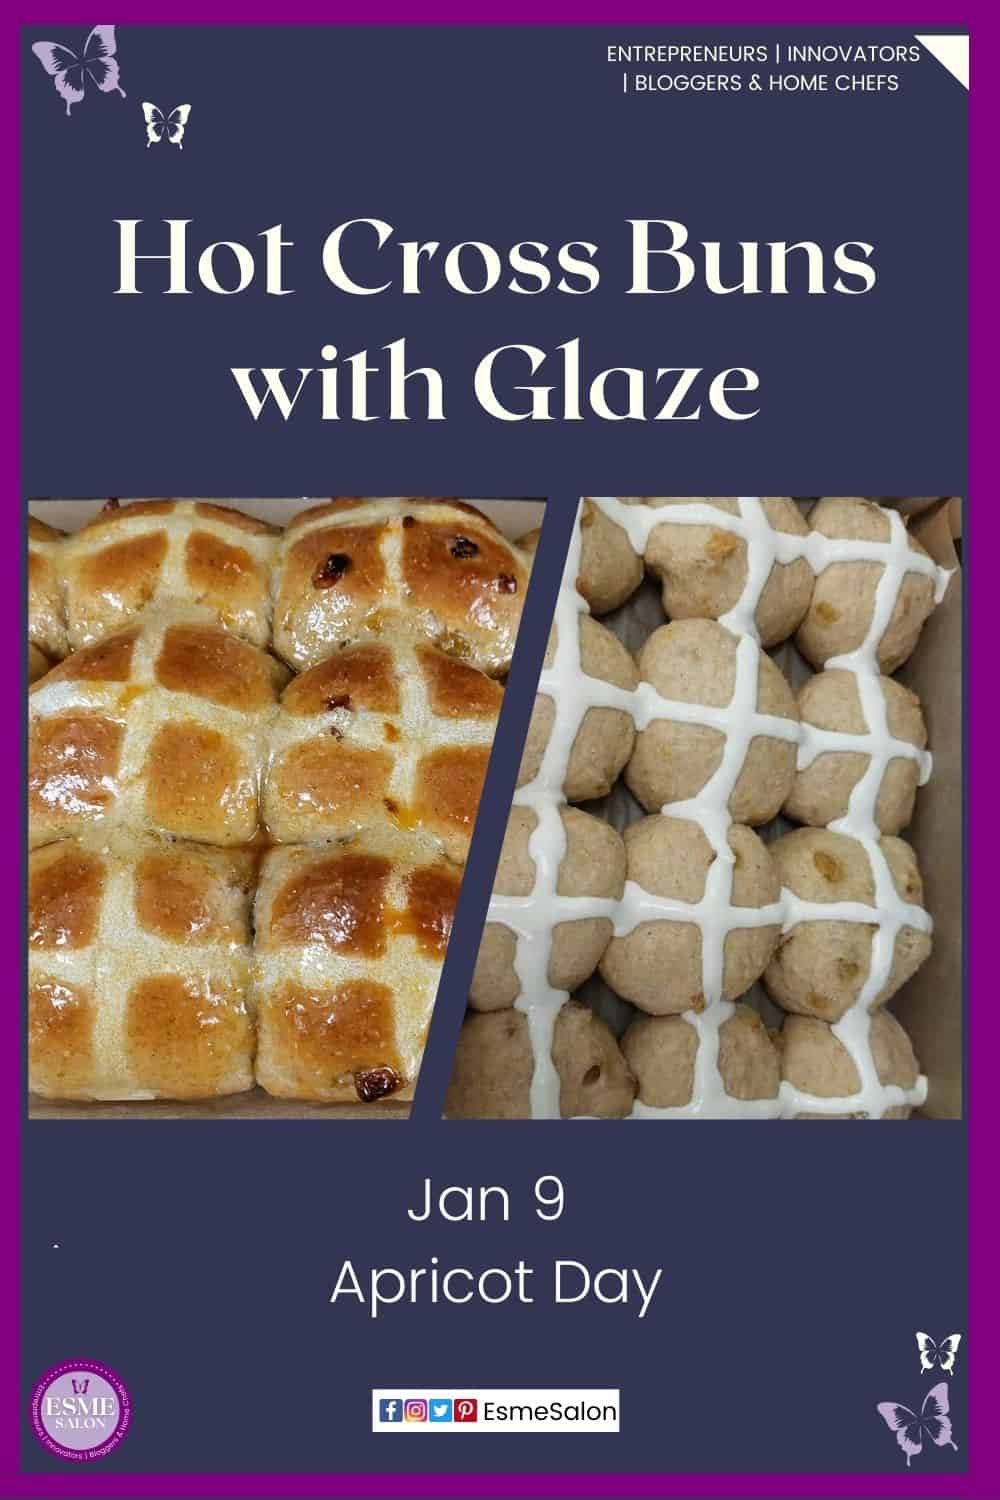 an image of raw Hot Cross Buns with glaze cross as well as baked with glaze